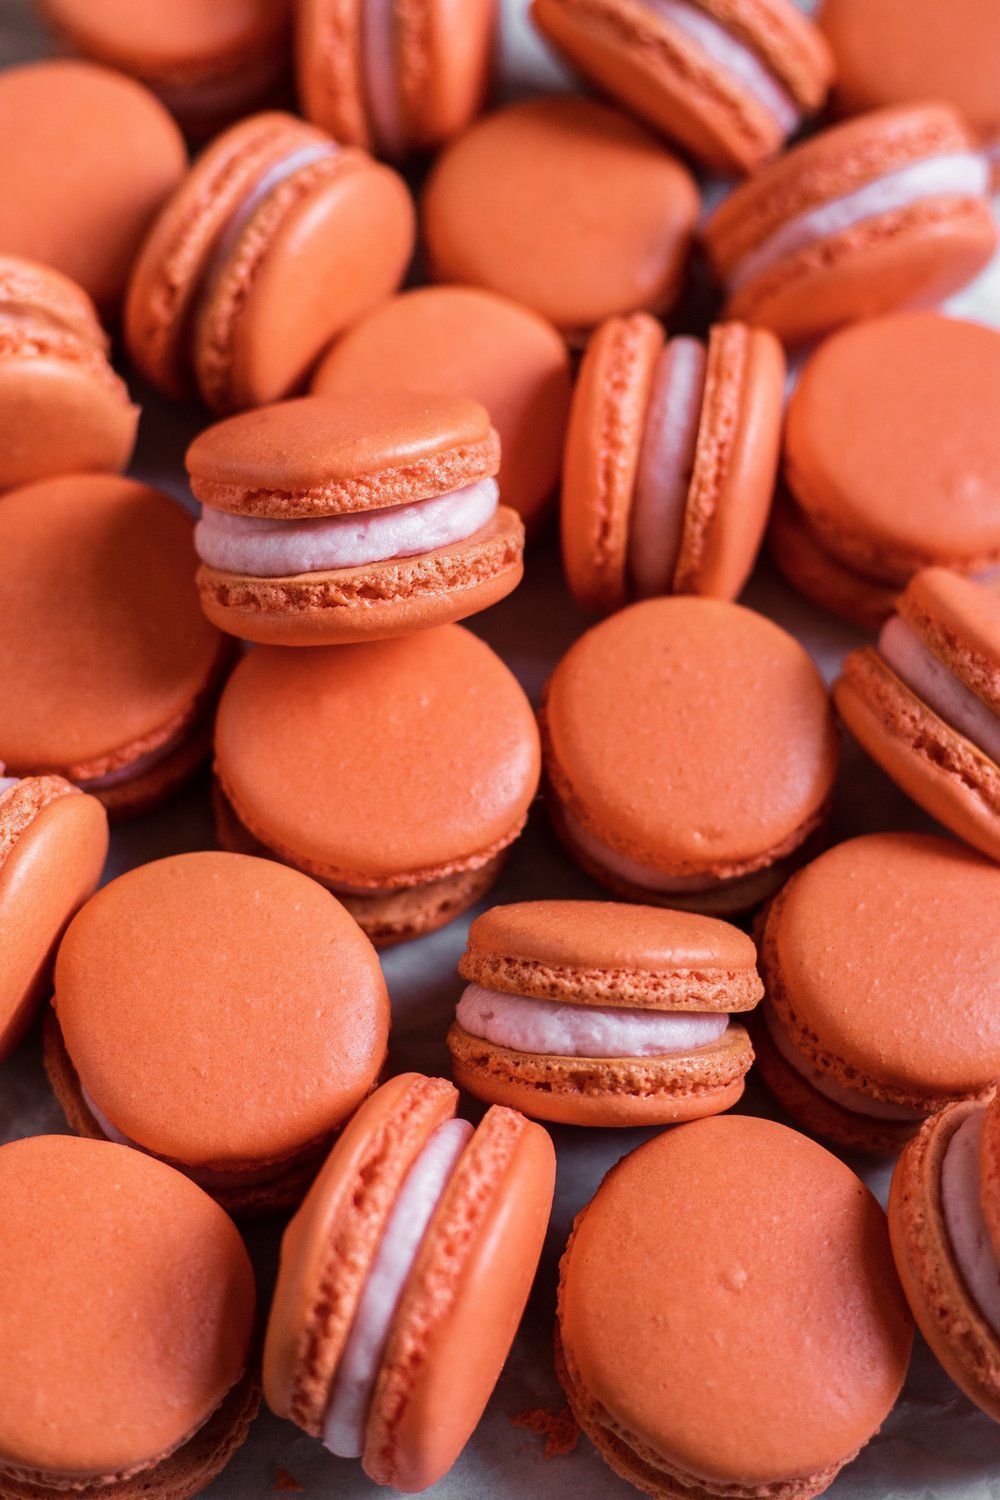 A close up of some macaroons on top - Orange, macarons